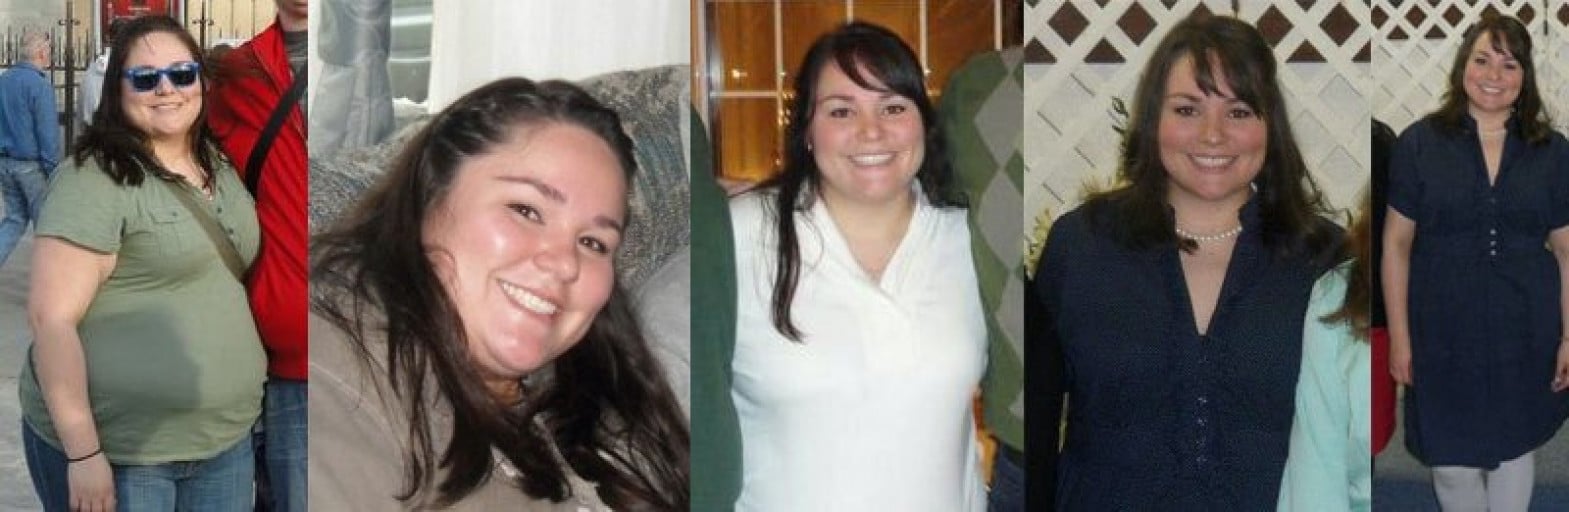 26 Year Old Woman Loses 70 Pounds, 25 More to Go!